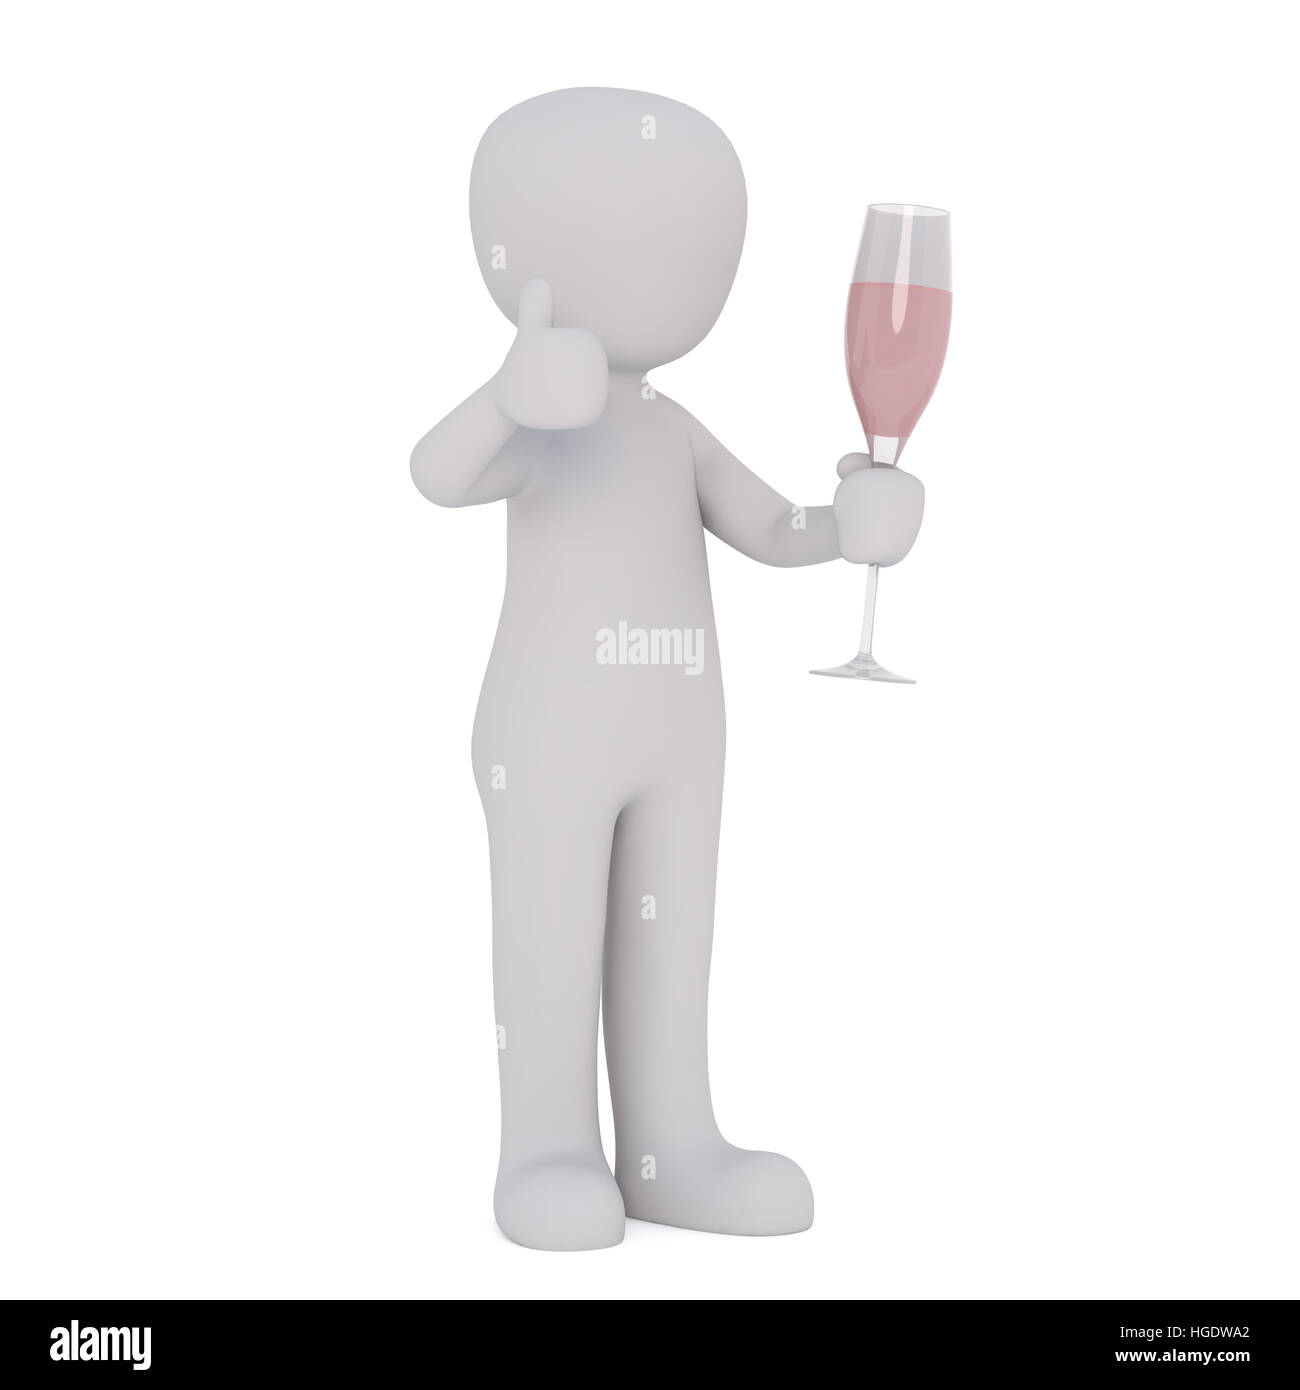 3d Rendering of Cartoon Figure Holding Champagne Flute Filled with Pink Wine and Giving Thumbs Up Sign in front of White Background Stock Photo